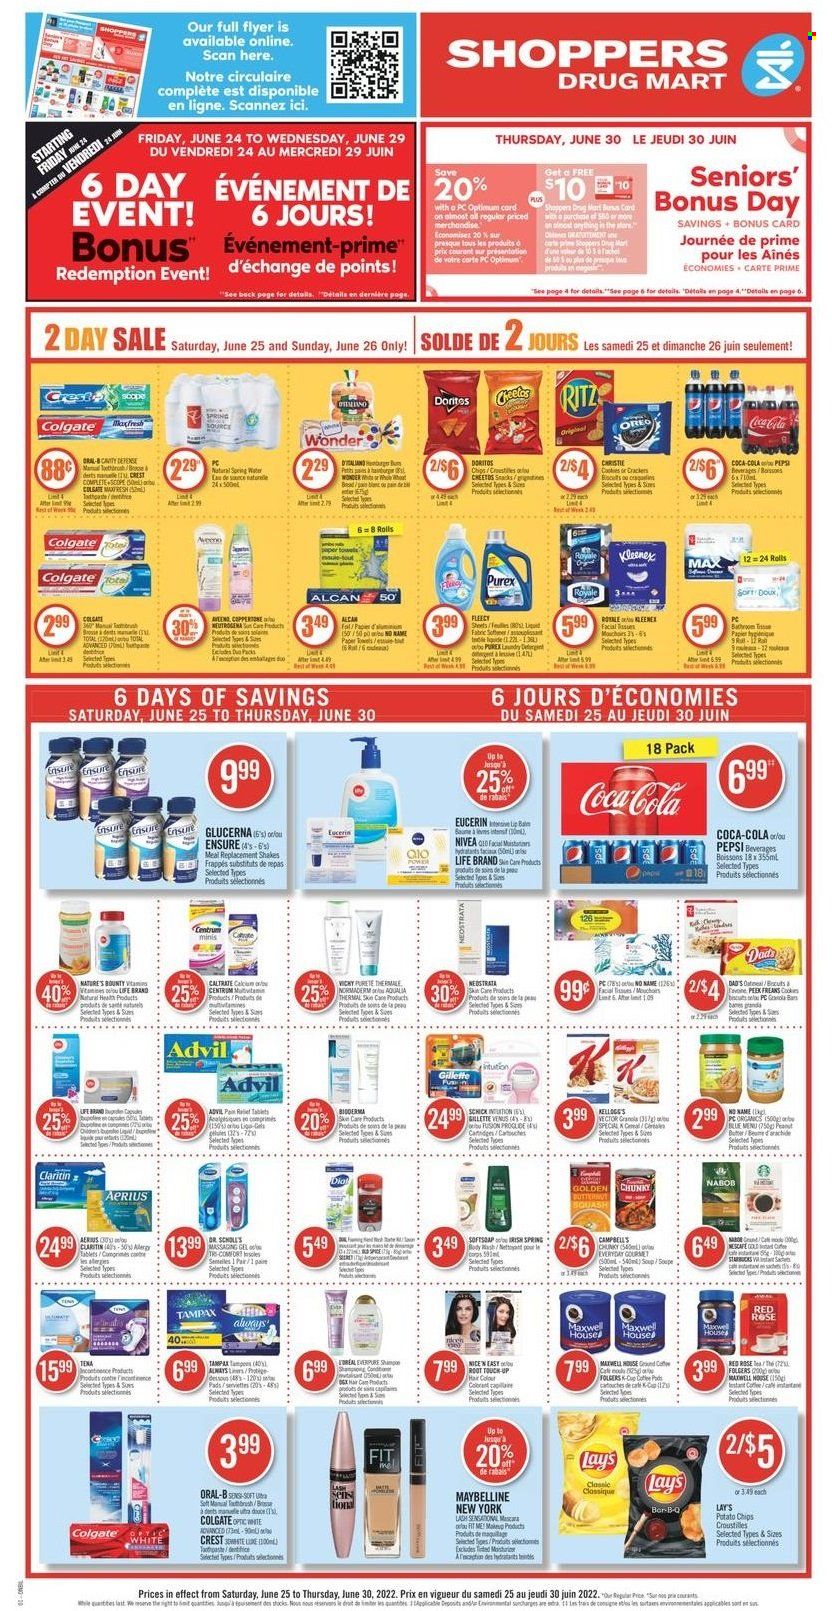 Shoppers Drug Mart Flyer - June 25, 2022 - June 30, 2022 - Sales products - No Name, Campbell's, soup, shakes, snack, crackers, Kellogg's, biscuit, RITZ, Doritos, potato chips, Cheetos, chips, Lay's, oatmeal, granola bar, spice, peanut butter, Coca-Cola, Pepsi, Maxwell House, instant coffee, Folgers, coffee capsules, Starbucks, K-Cups, Nivea, Kleenex, tissues, kitchen towels, paper towels, laundry detergent, Purex, body wash, Vichy, toothpaste, Crest, tampons, facial tissues, Gillette, L’Oréal, hair color, Schick, Venus, makeup, mascara, Maybelline, Optimum, Pain Relief, Nature's Bounty, glucerna, Advil Rapid, Centrum, Dr. Scholl's, calcium, detergent, Colgate, Eucerin, granola, Neutrogena, Tampax, Oreo, Nescafé. Page 1.